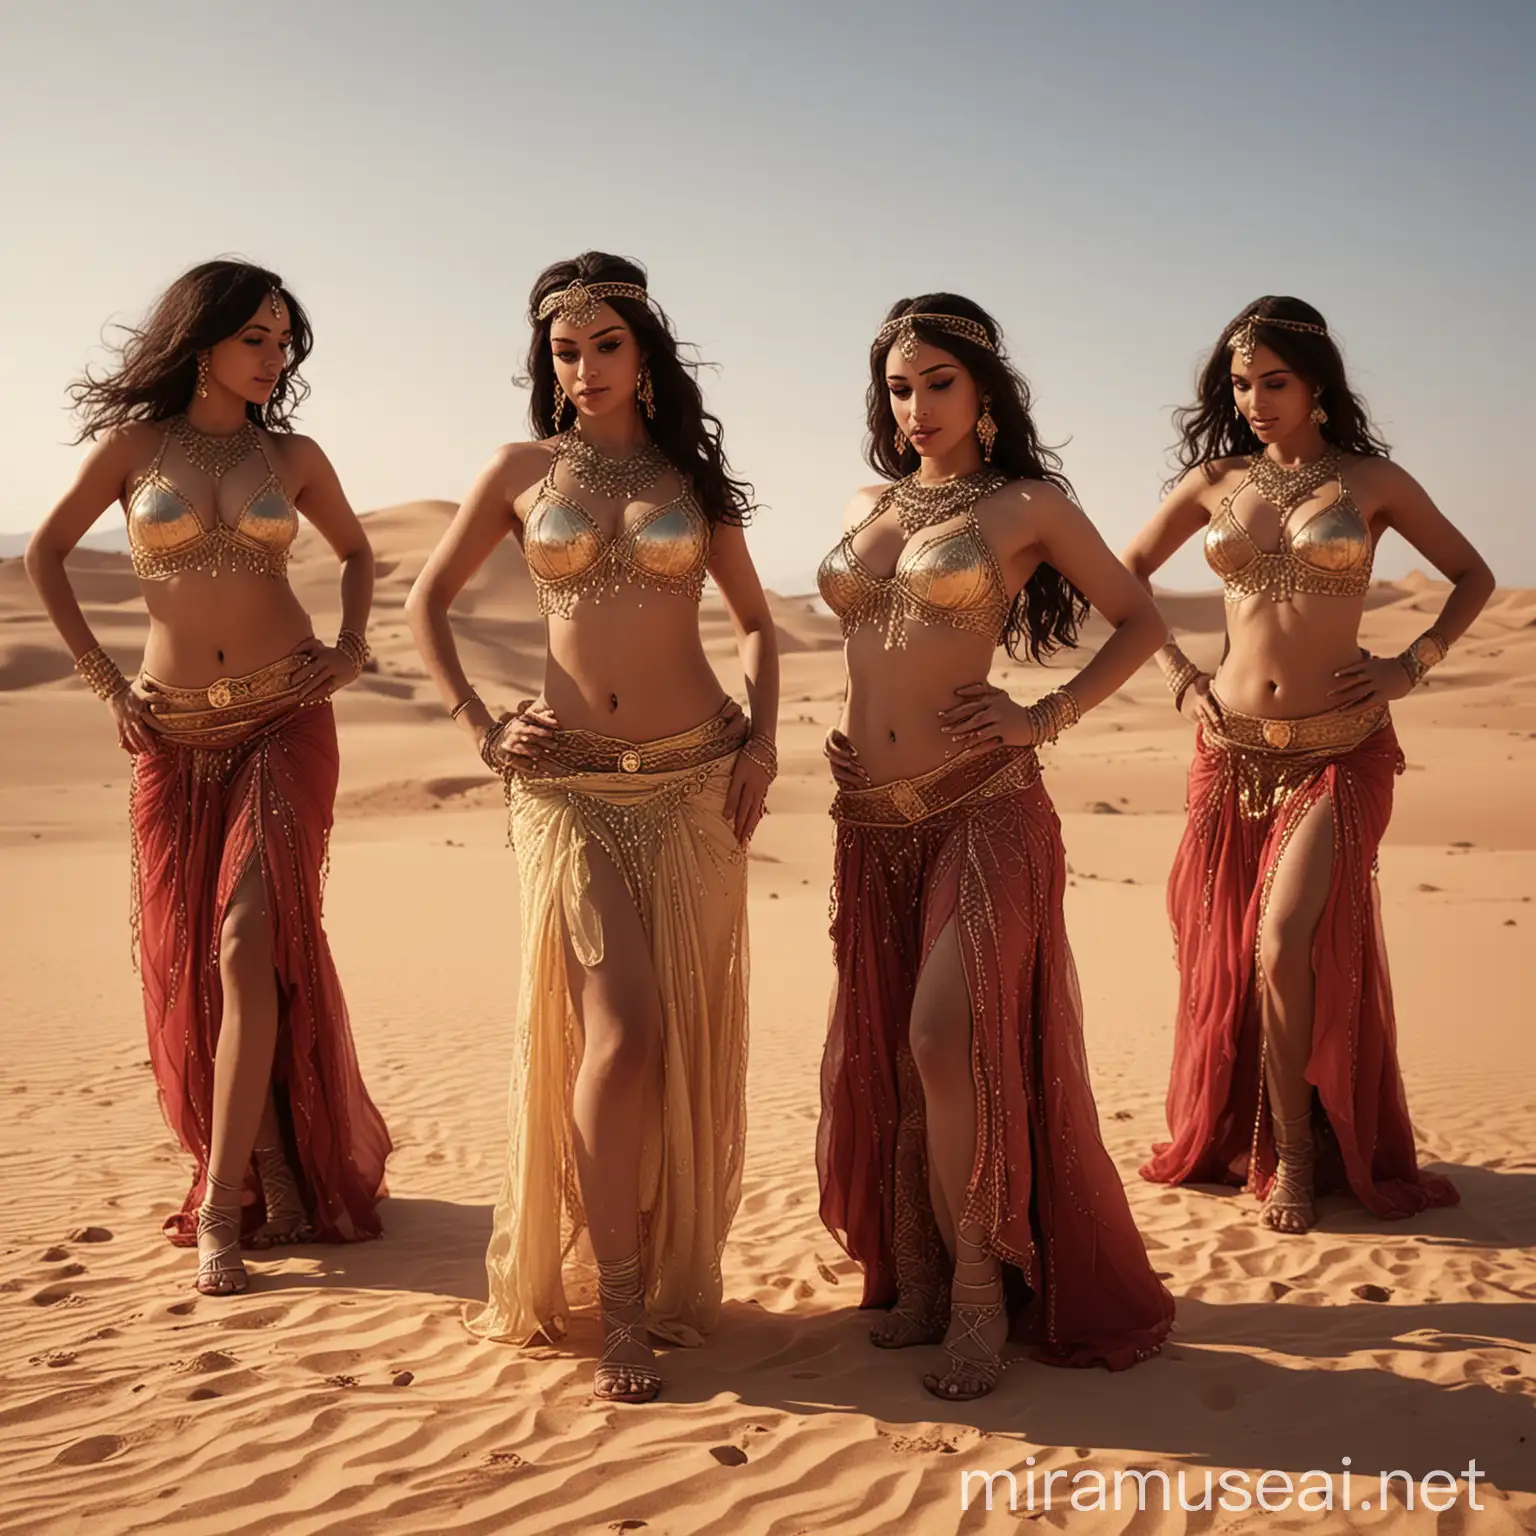 Intricate Arabic Belly Dancers Performing in the Desert